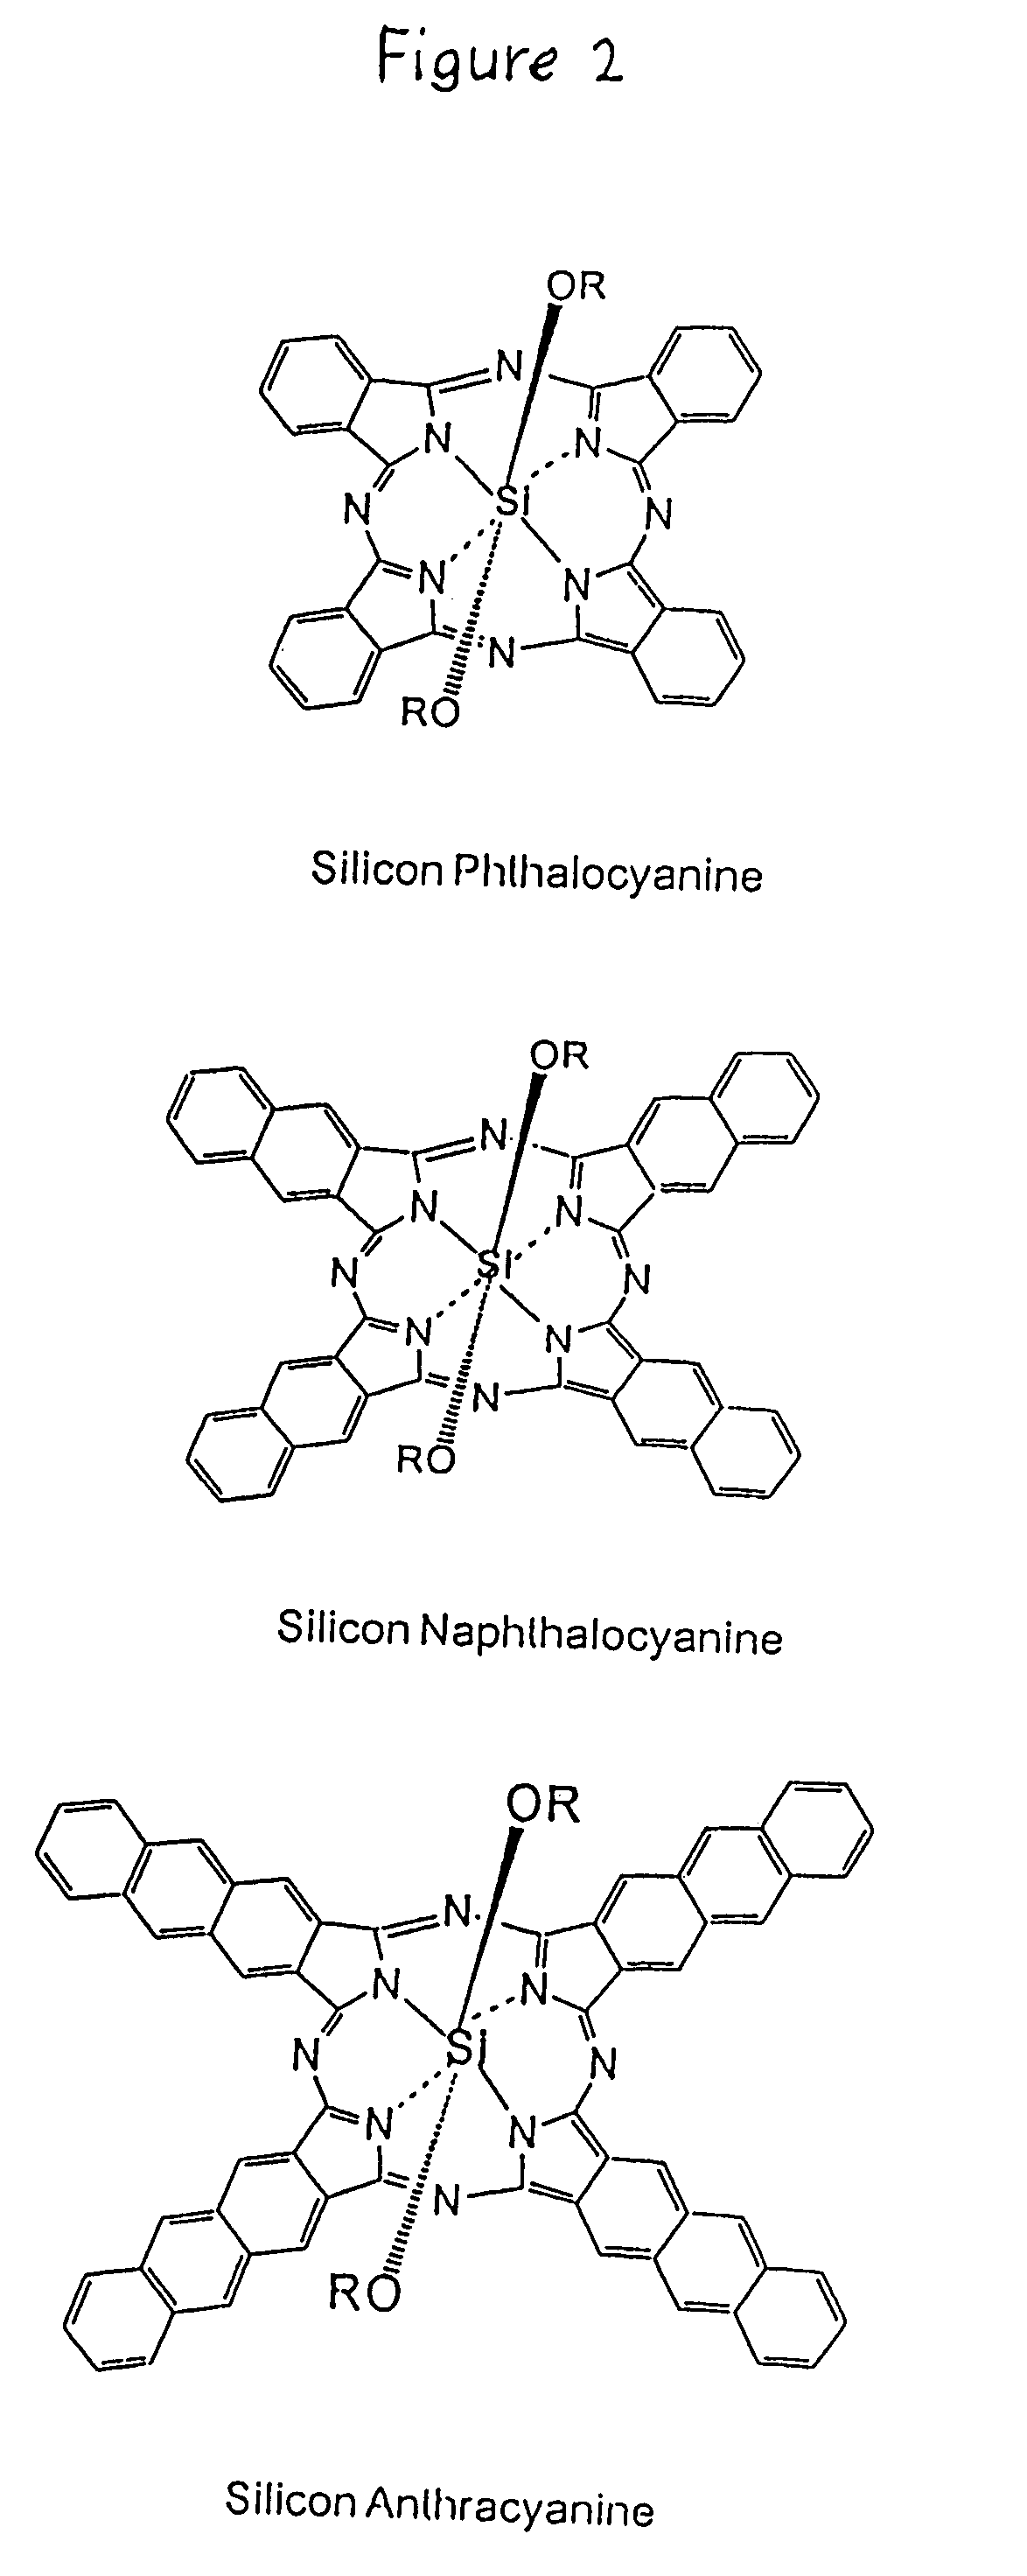 Hybrid phthalocyanine derivatives and their uses